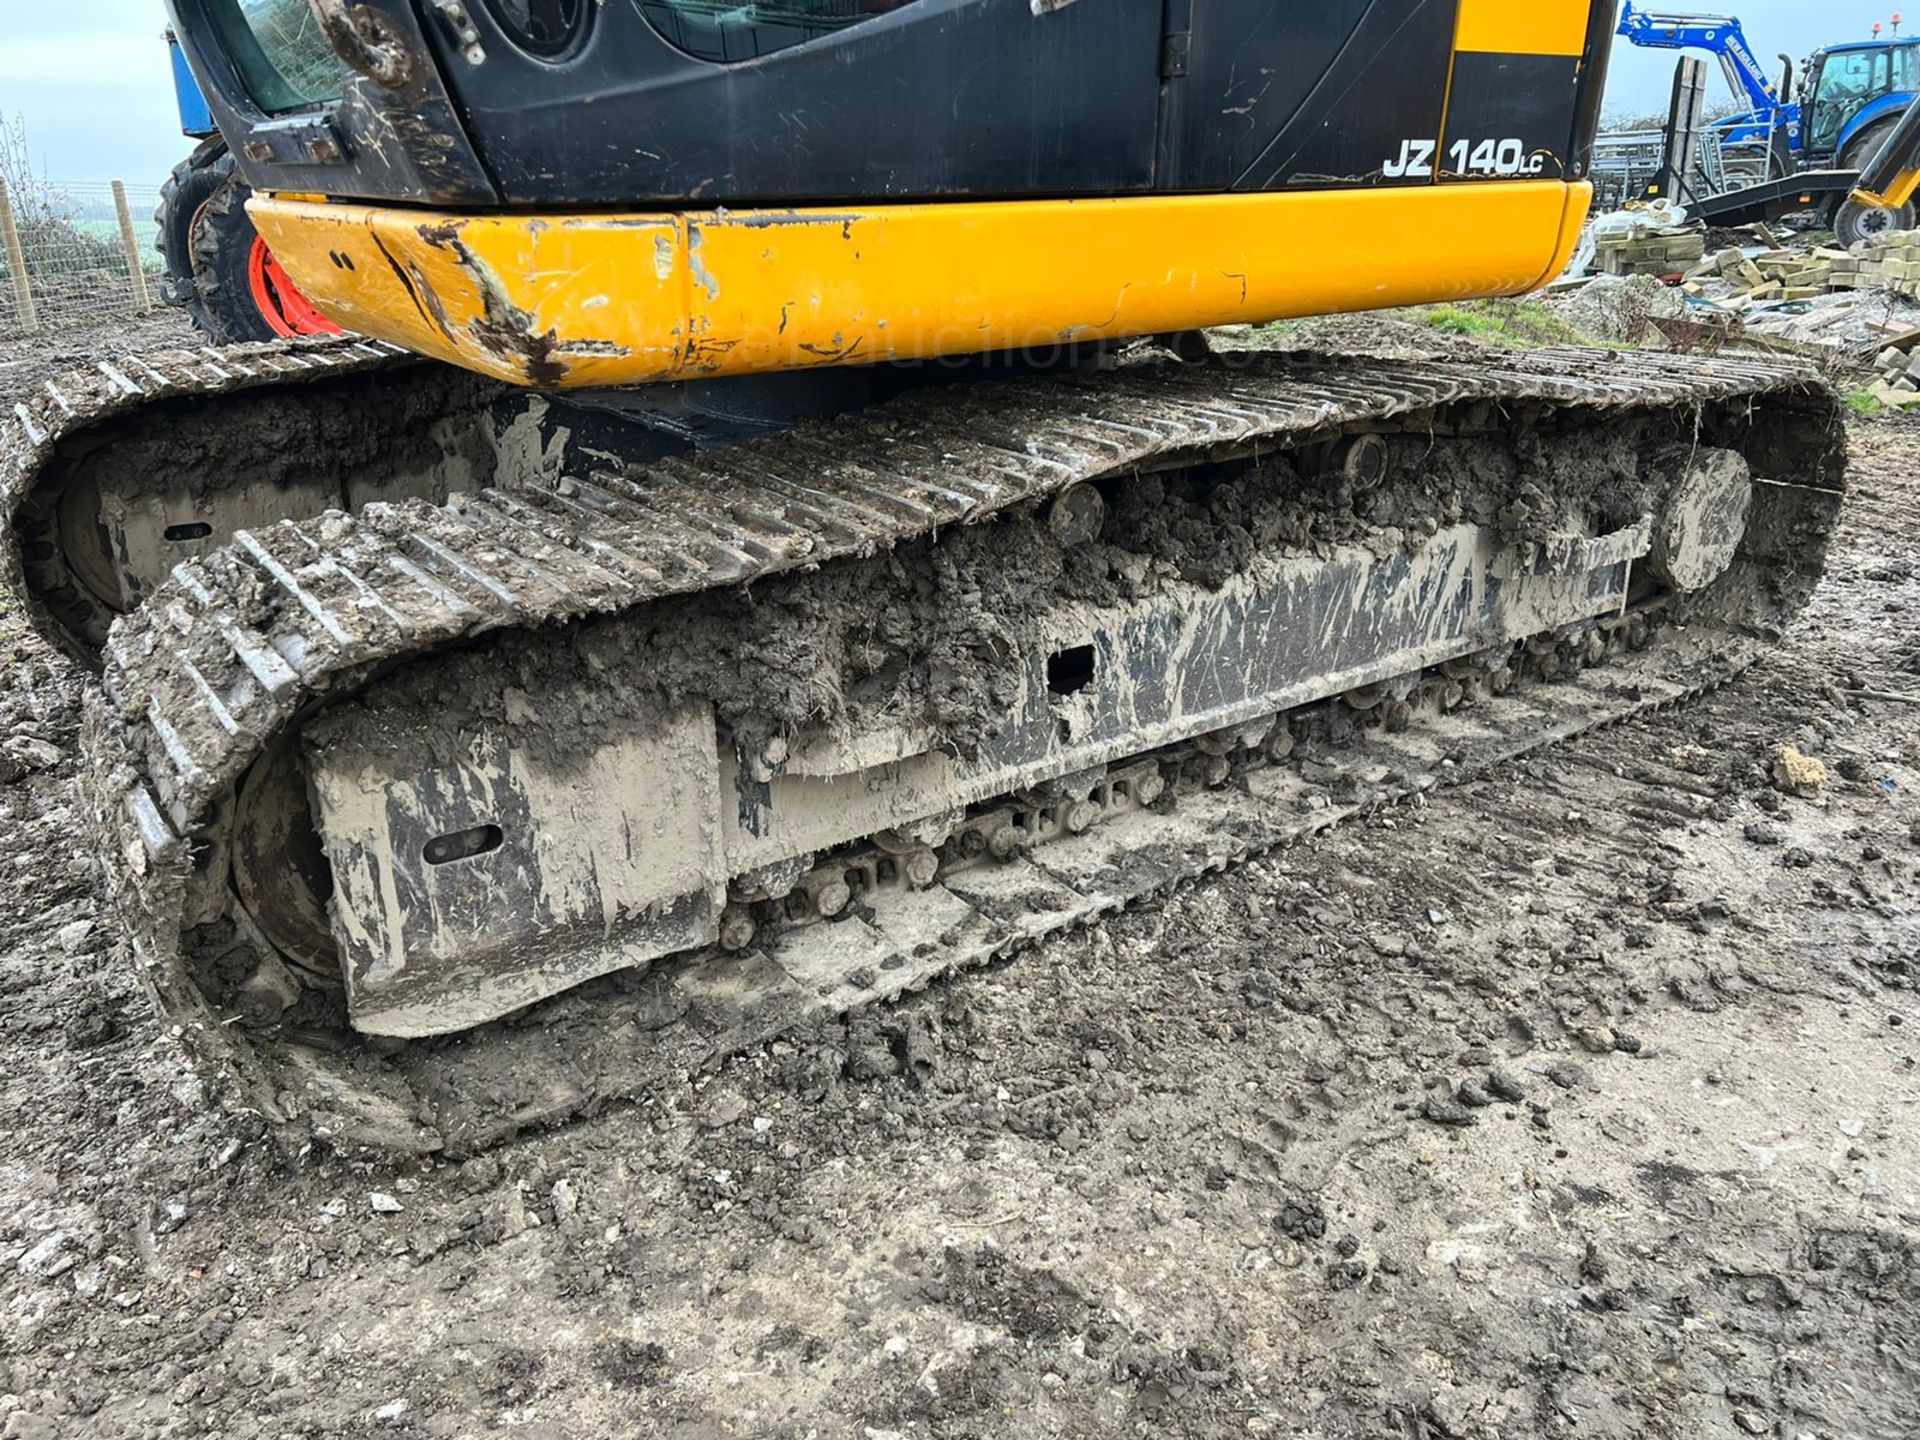 2008 JCB JZ140LC 15 TON STEEL TRACKED EXCAVATOR, RUNS DRIVES AND DIGS, SHOWING 9815 HOURS *PLUS VAT* - Image 23 of 30